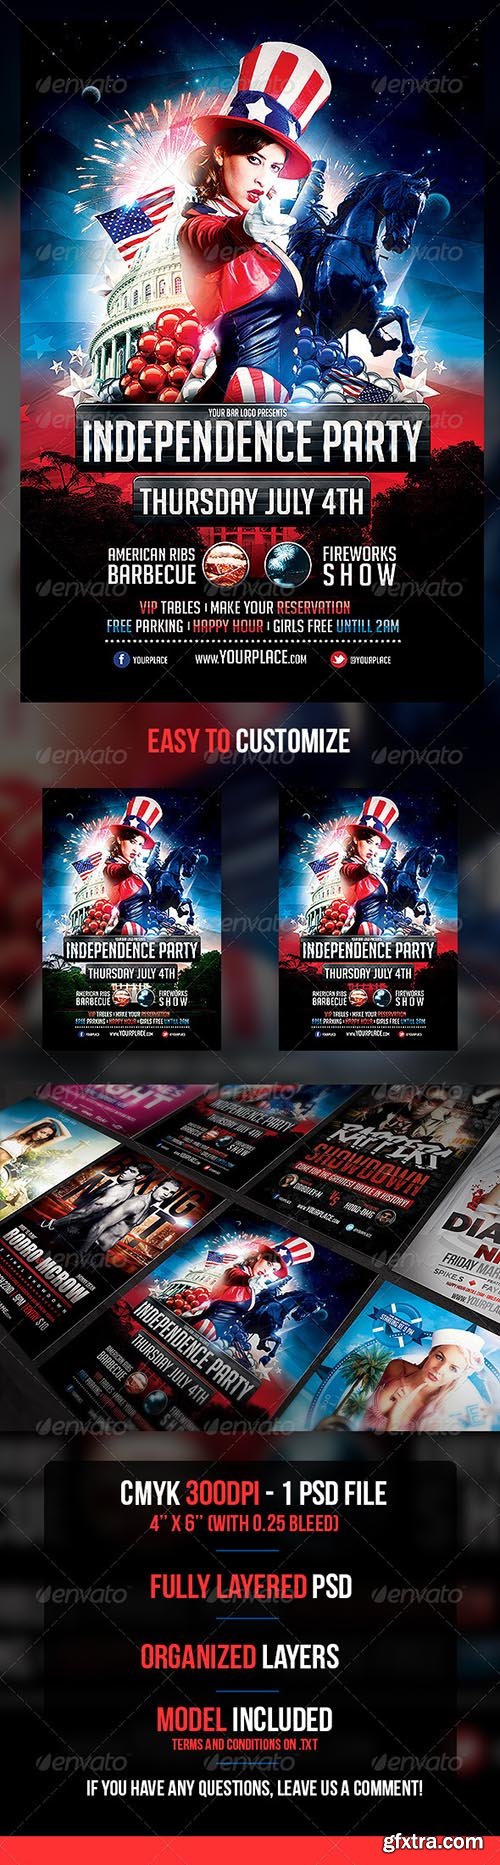 Independence Day Flyer Template 5028238